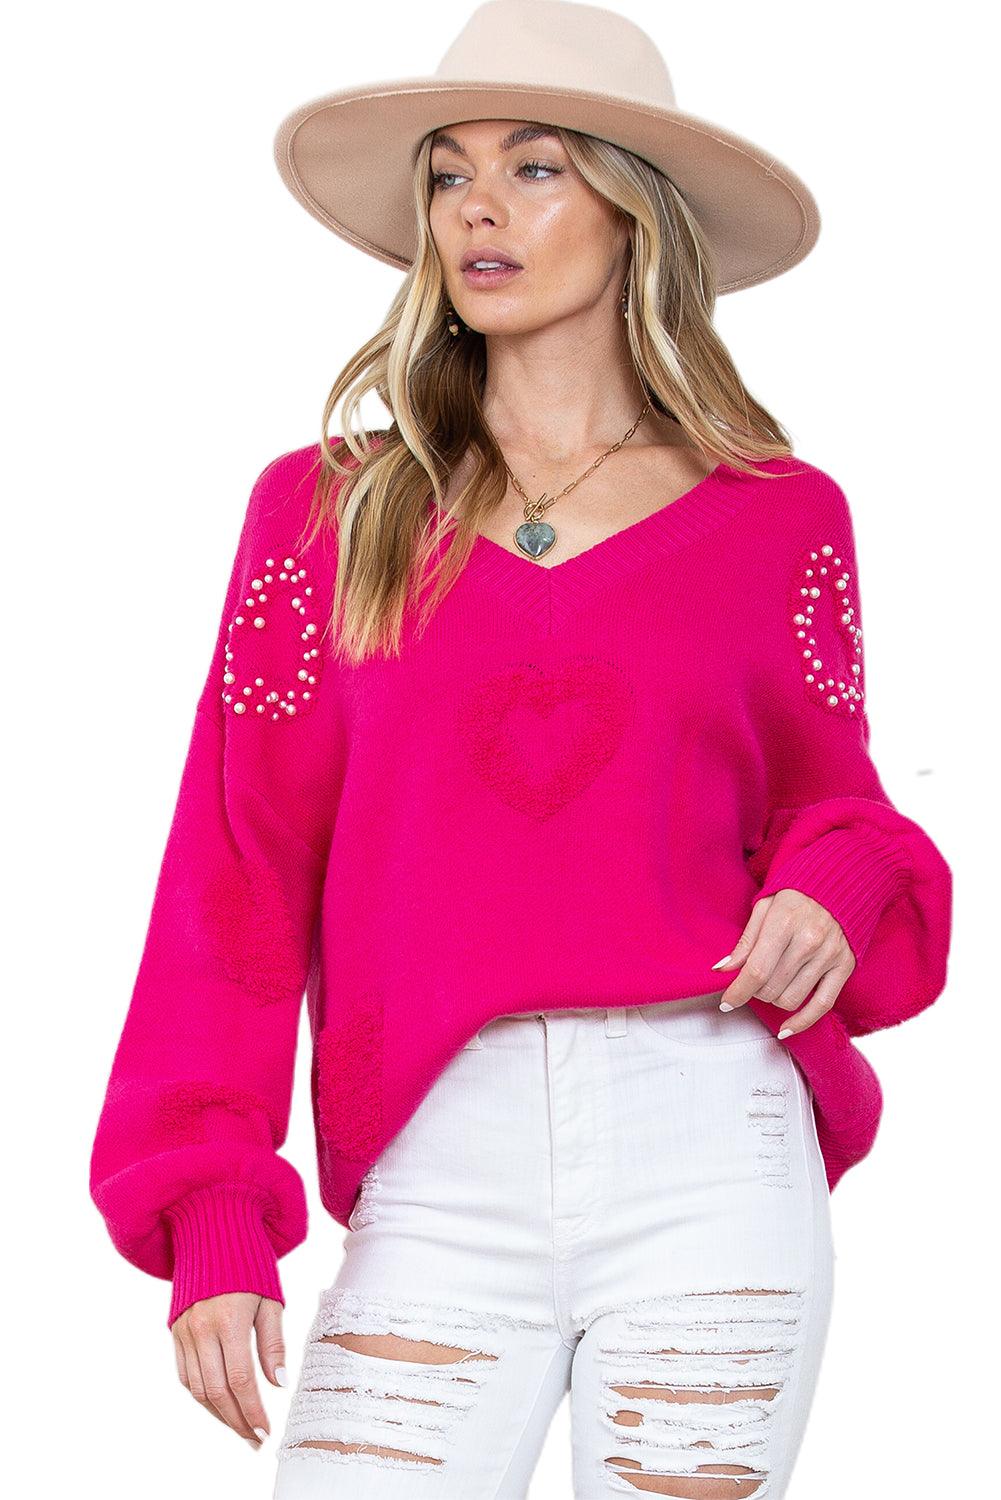 Rose Red Pearl Embellished Fuzzy Hearts V Neck Sweater